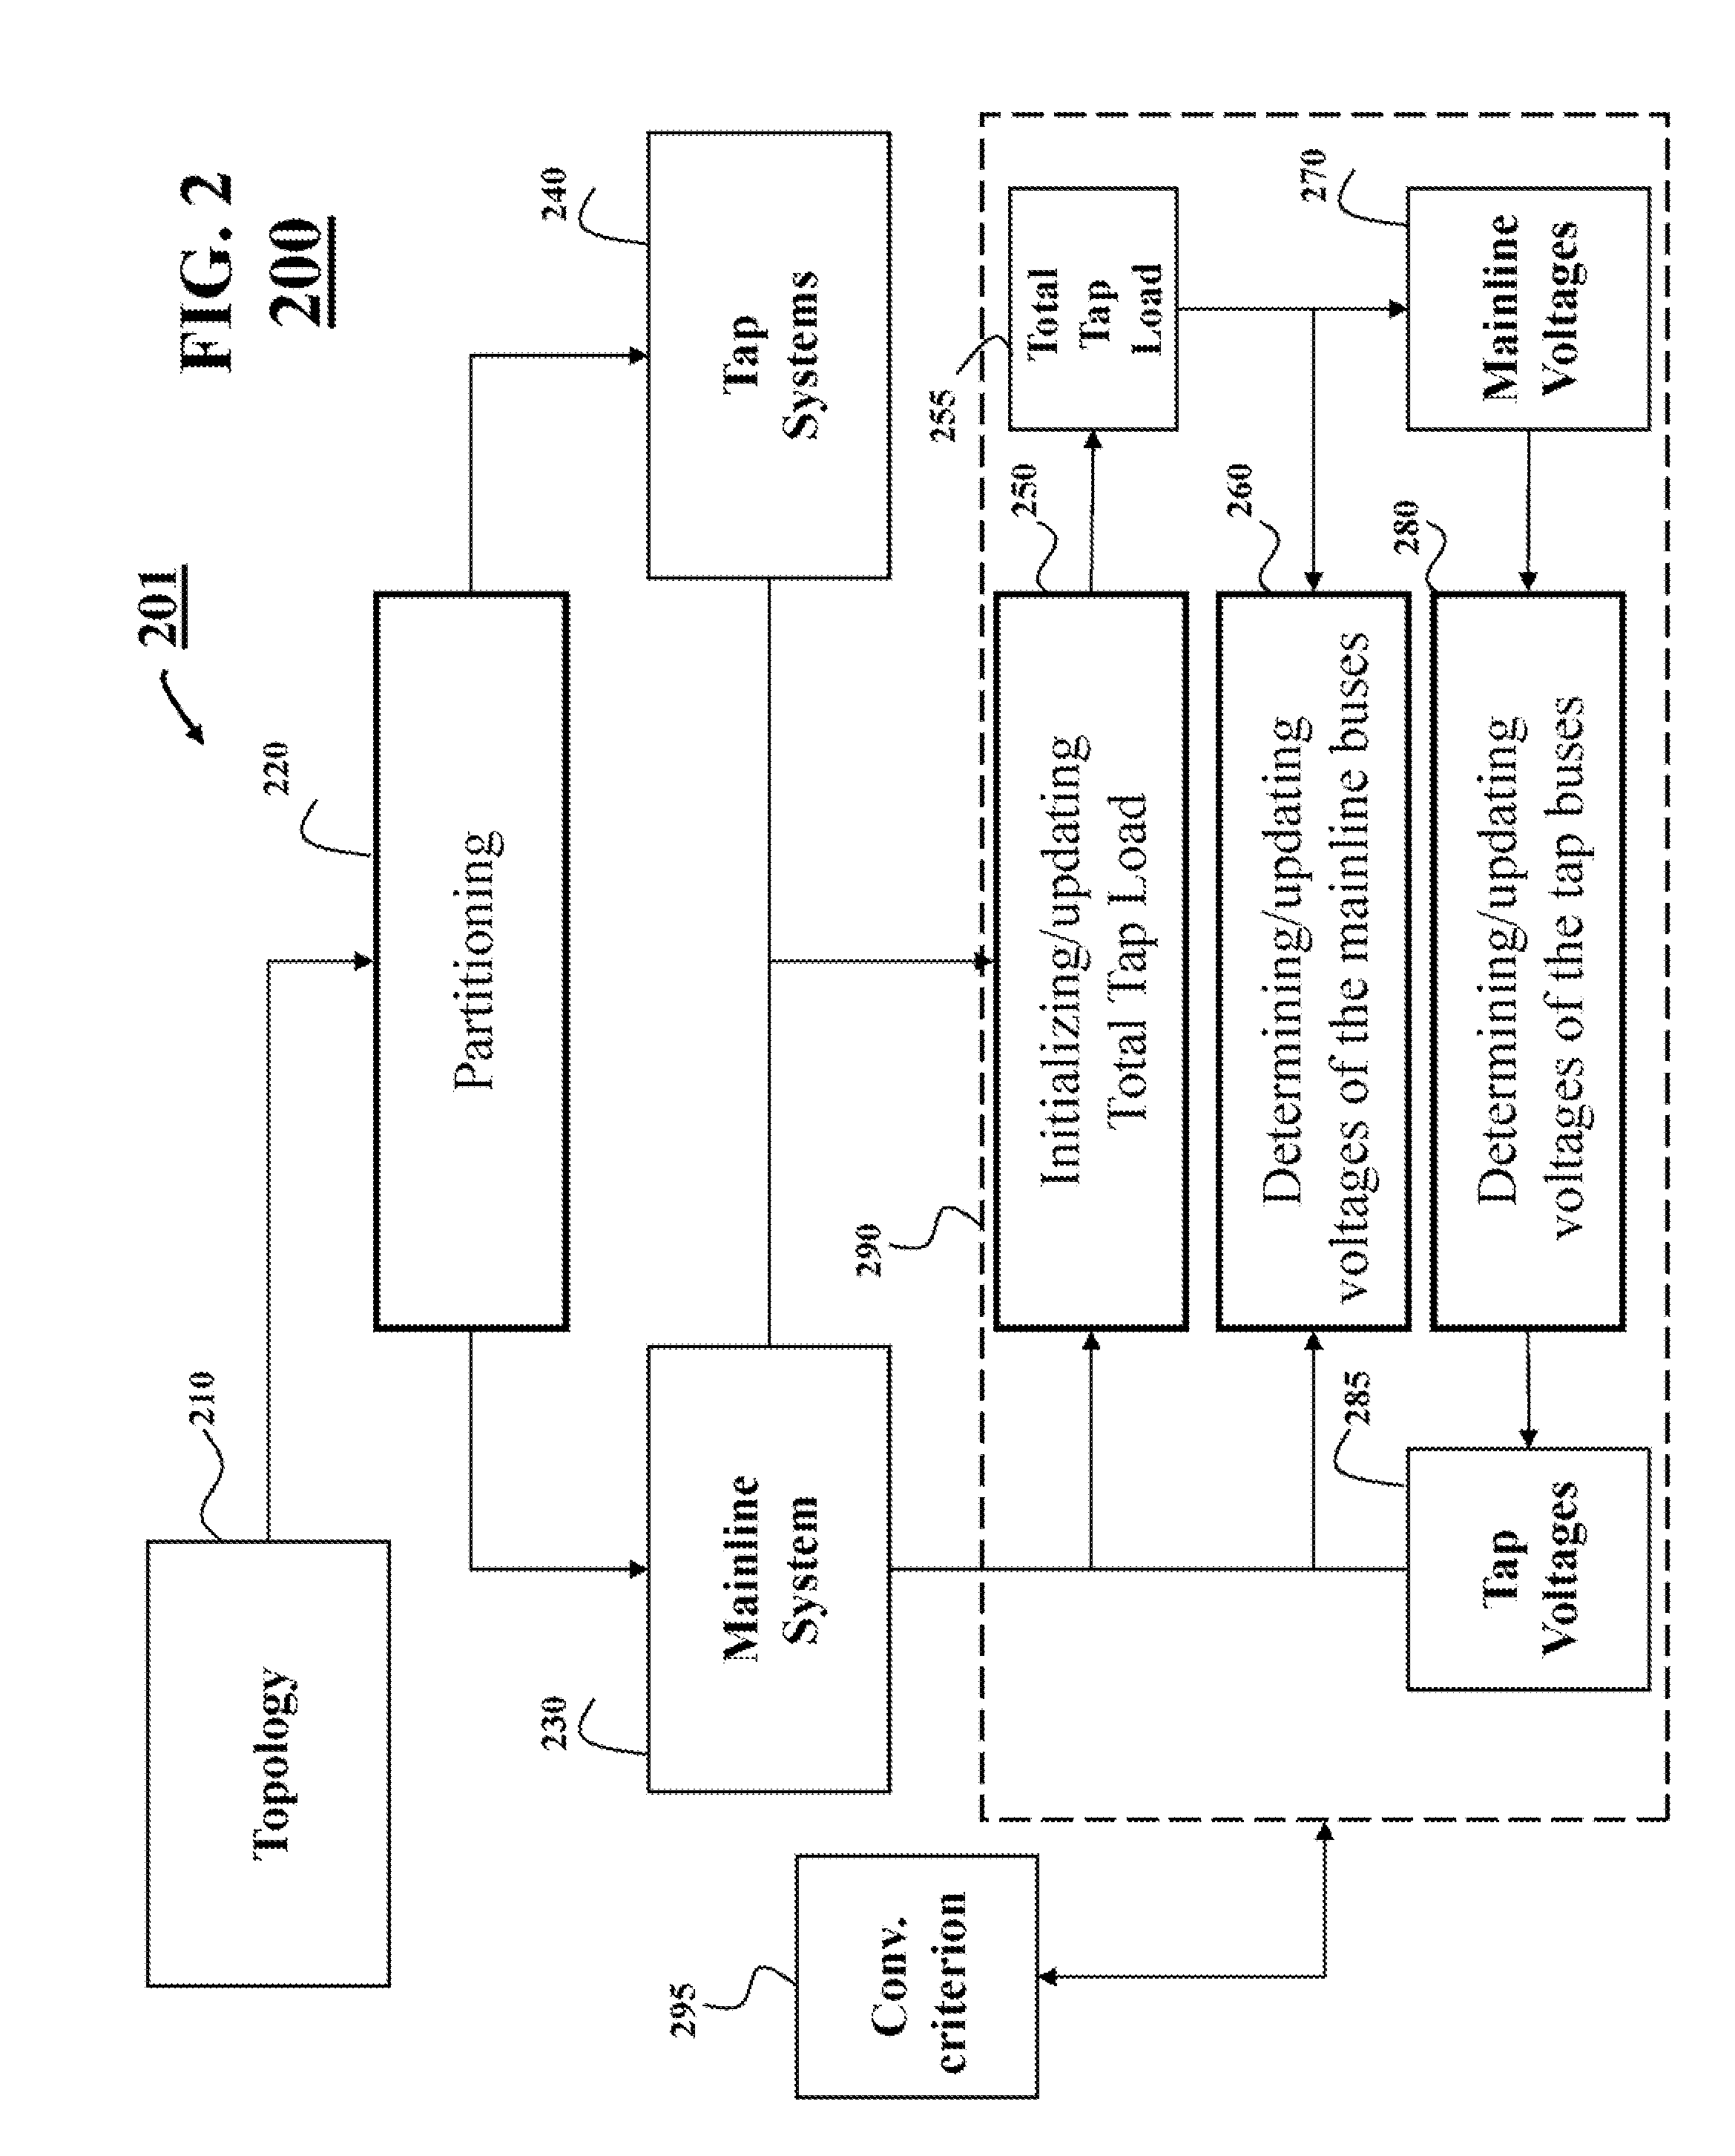 Hybrid Three-Phase Power Flow Analysis Method for Ungrounded Distribution Systems